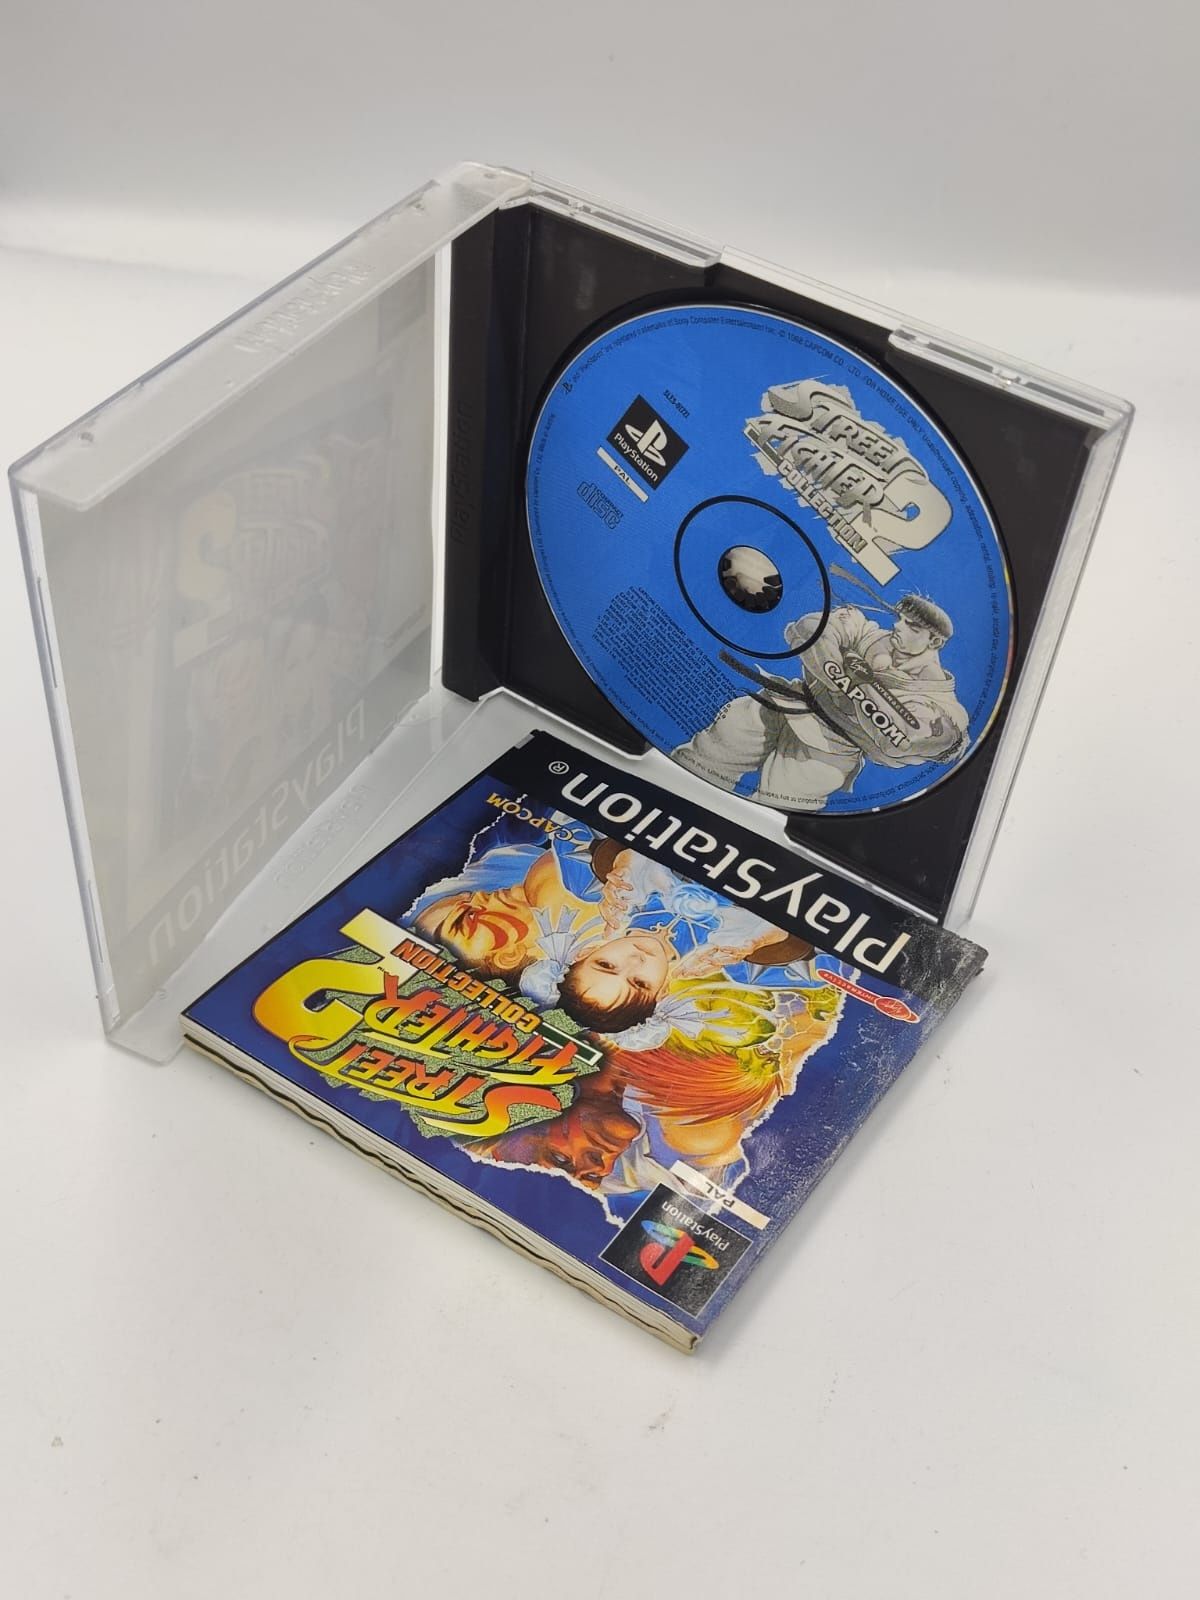 Street Fighter Collection 2 Ps1 nr 0514